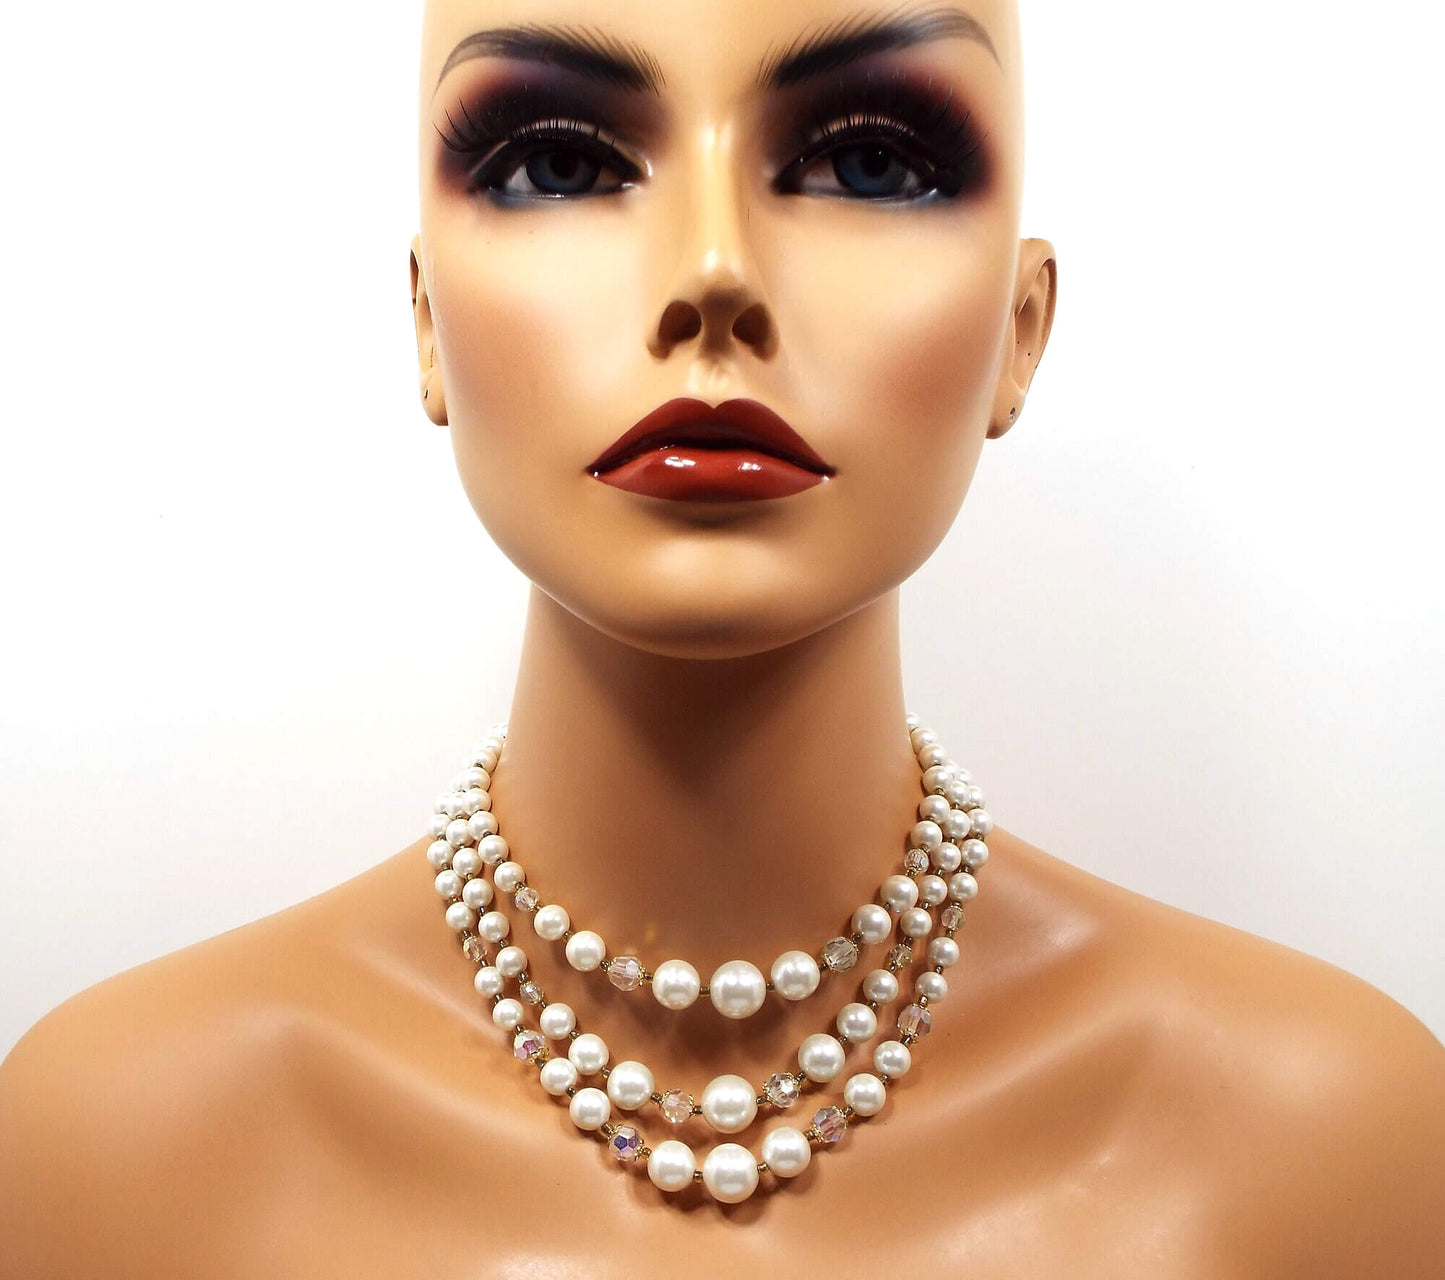 Japanese Faux Pearl and AB Crystal Vintage Multi Strand Necklace